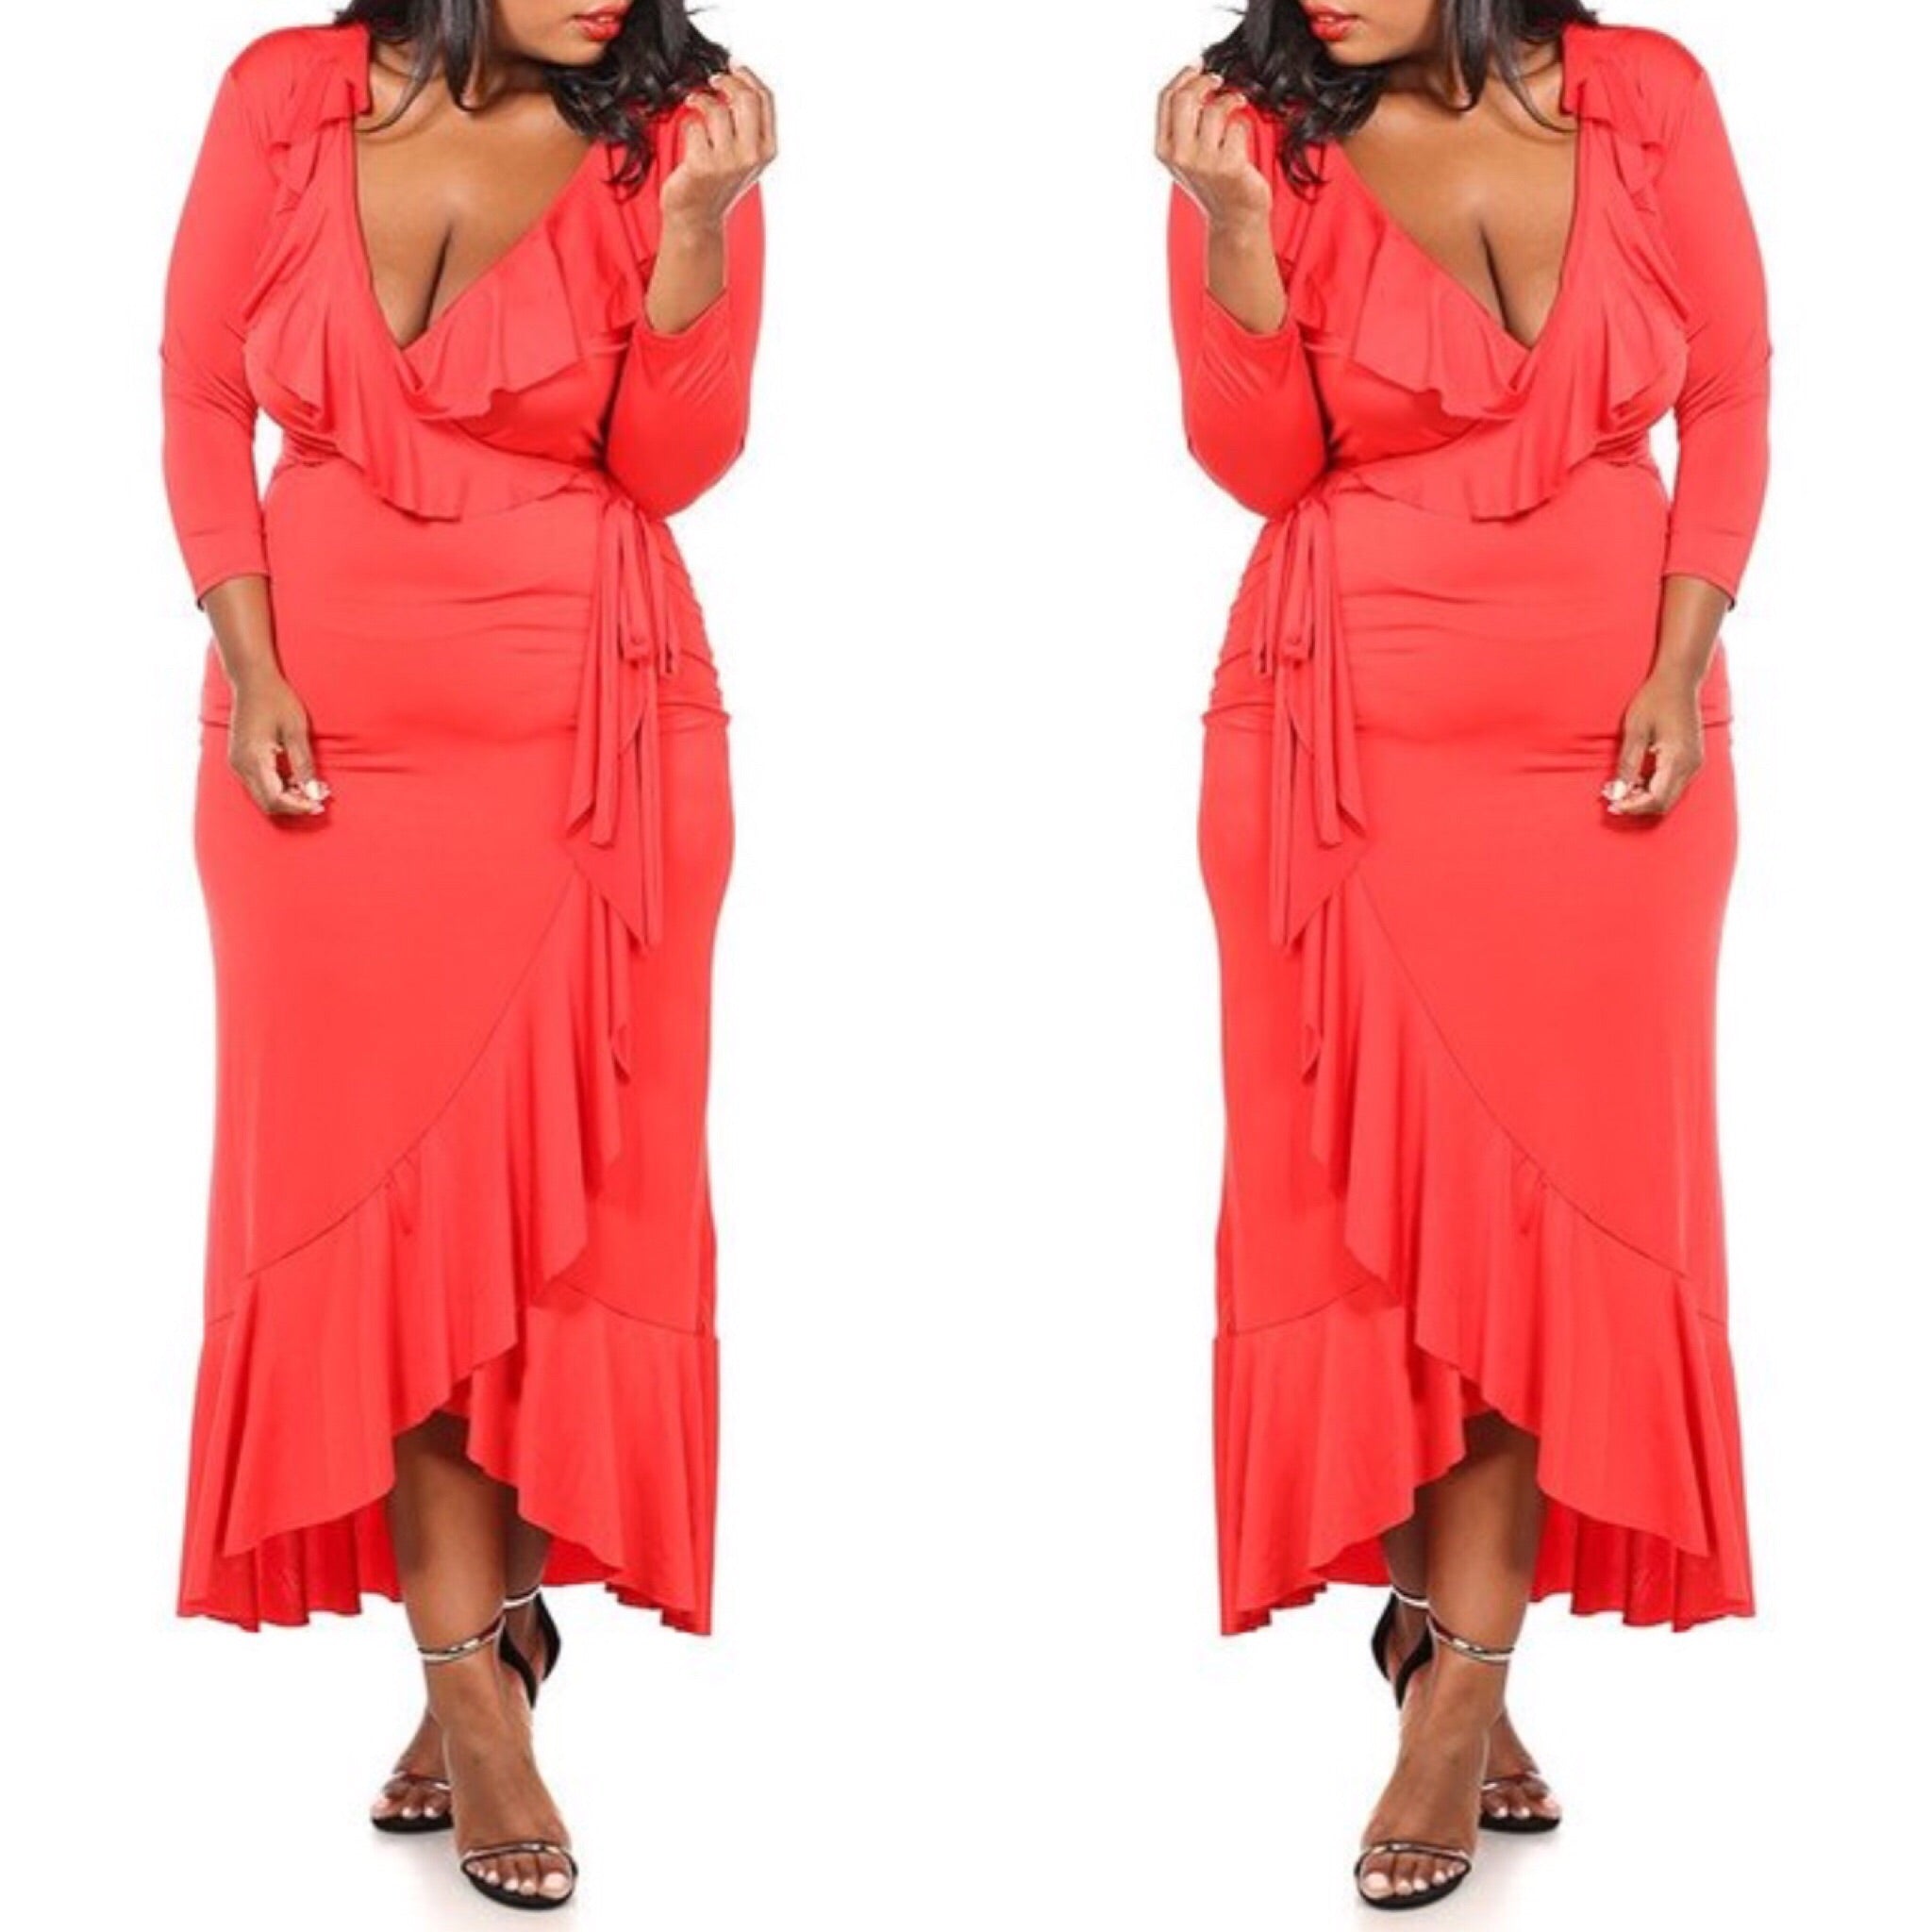 Beverly Ruffle Maxi Dress (Red) - Plus Size